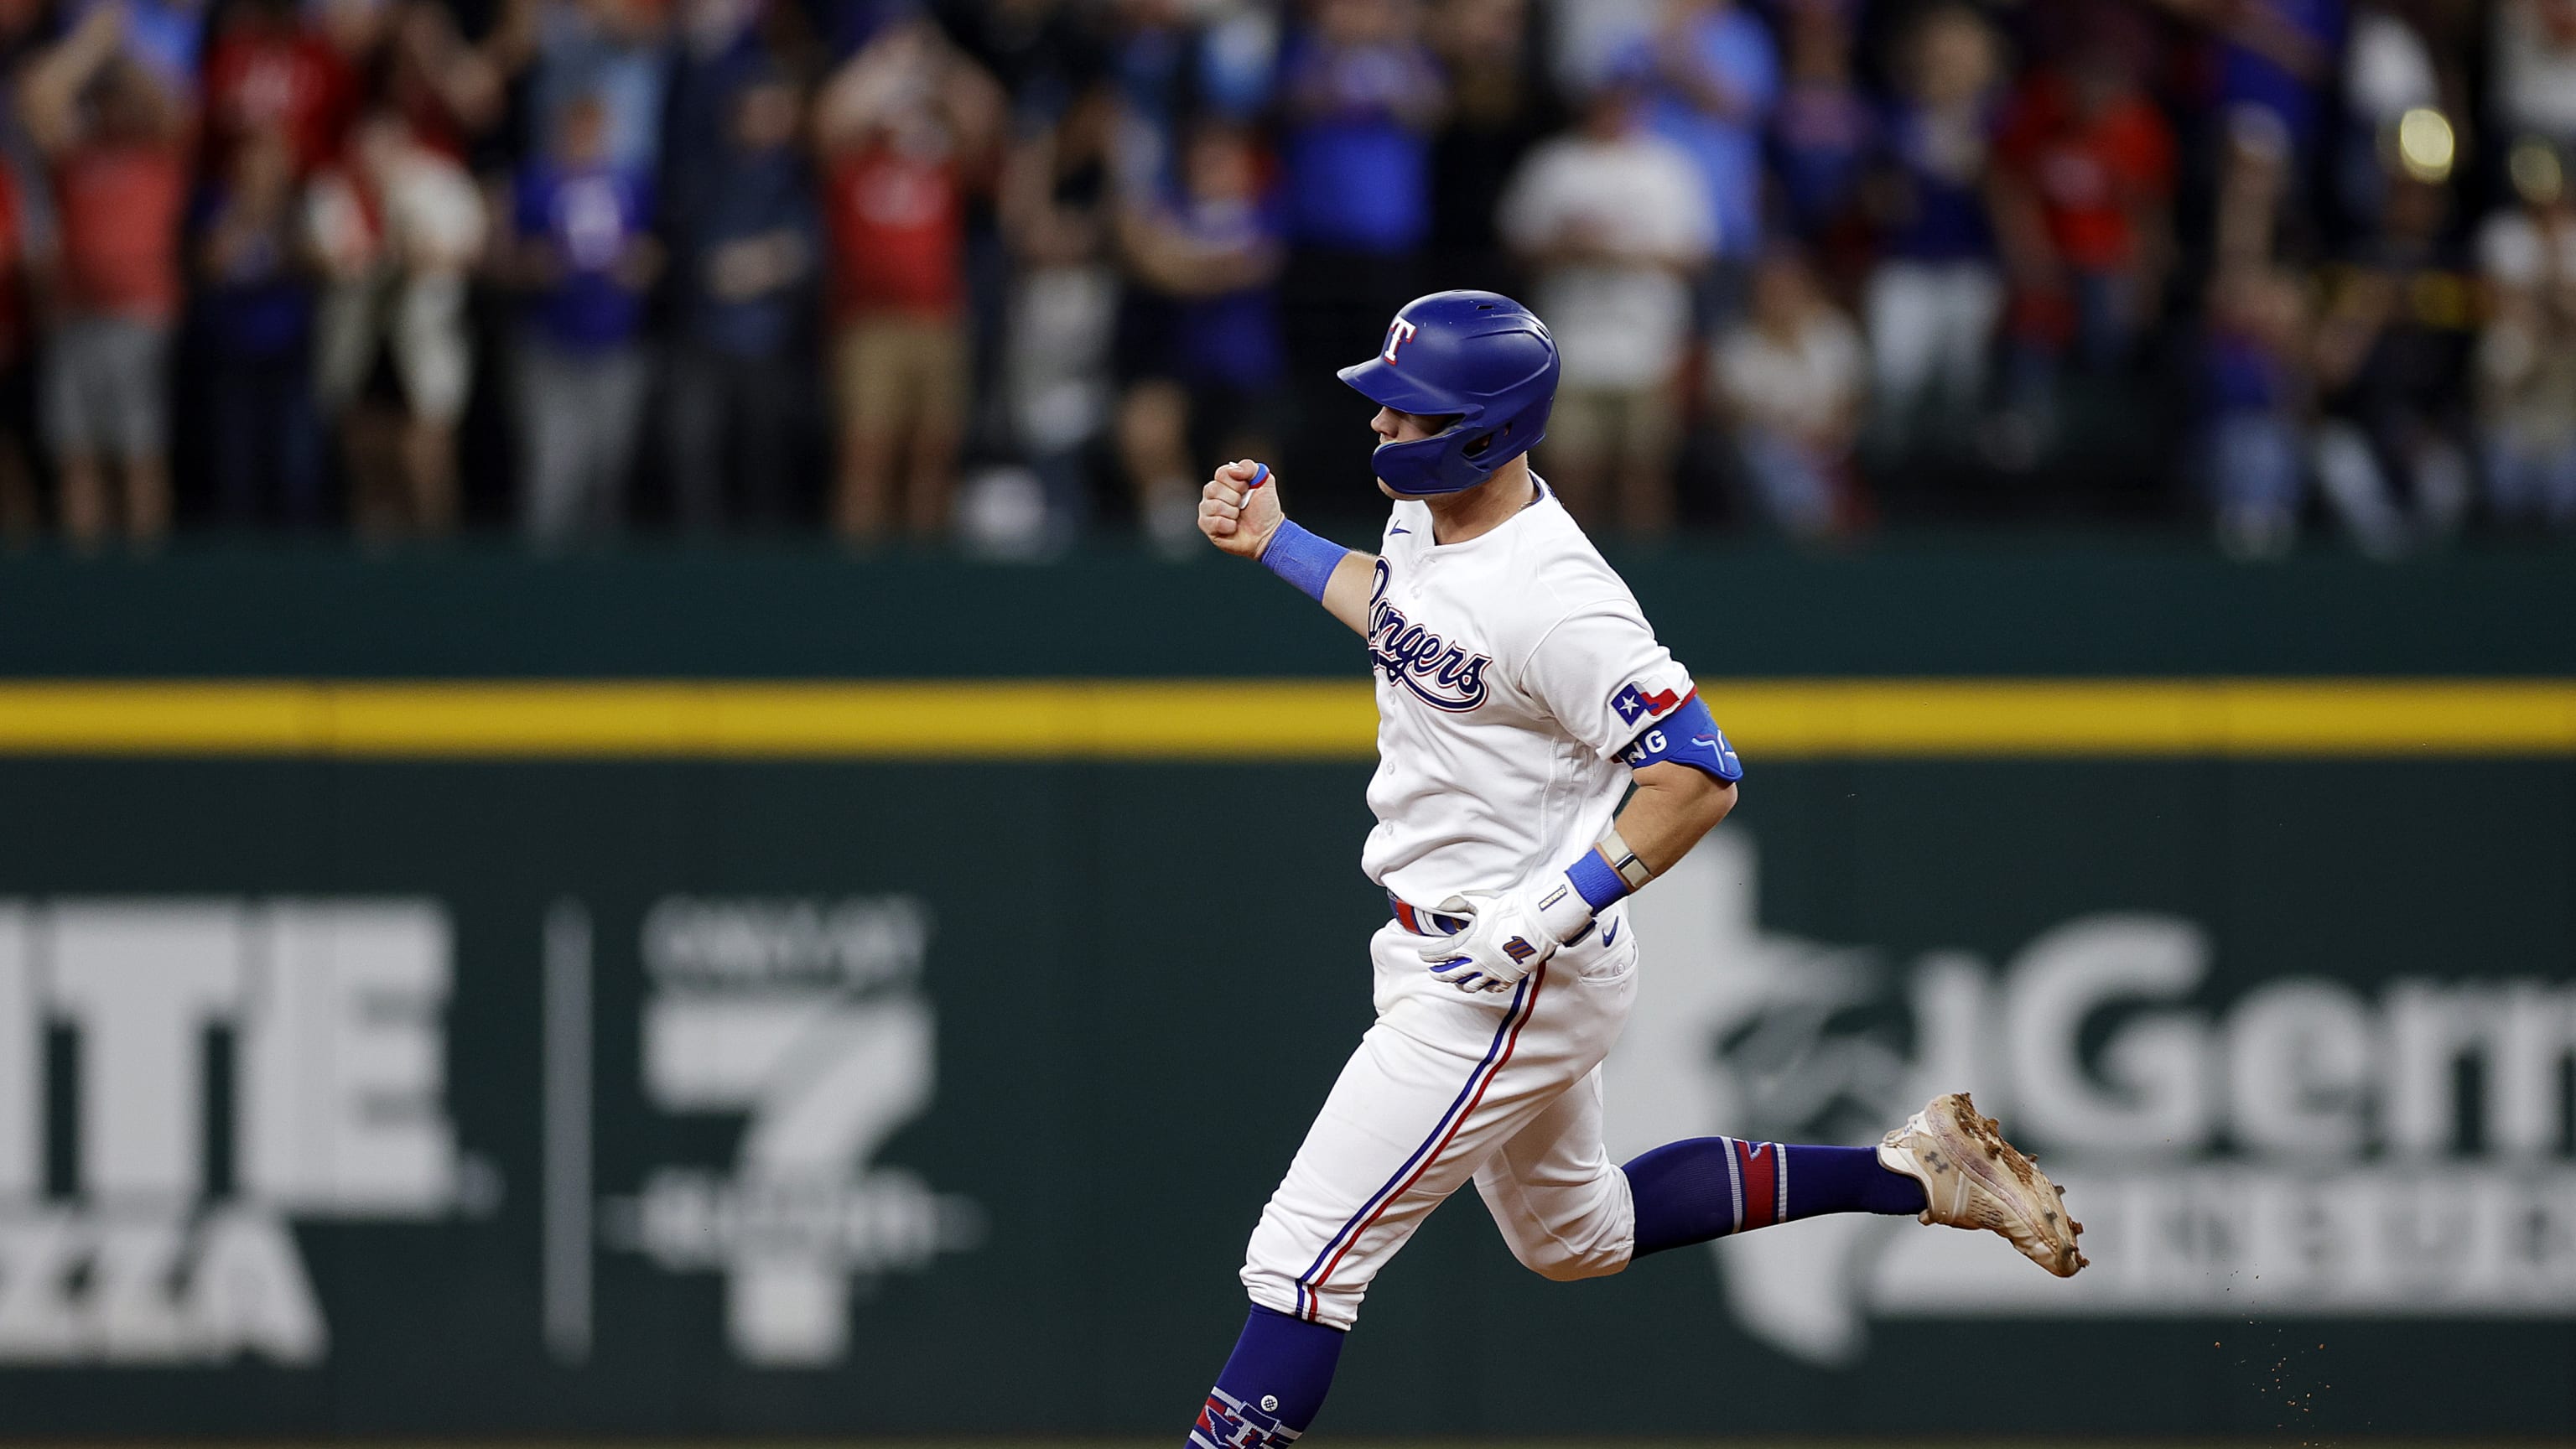 Texas Rangers switch Josh Jung, Nathaniel Lowe in lineup, plus MLB